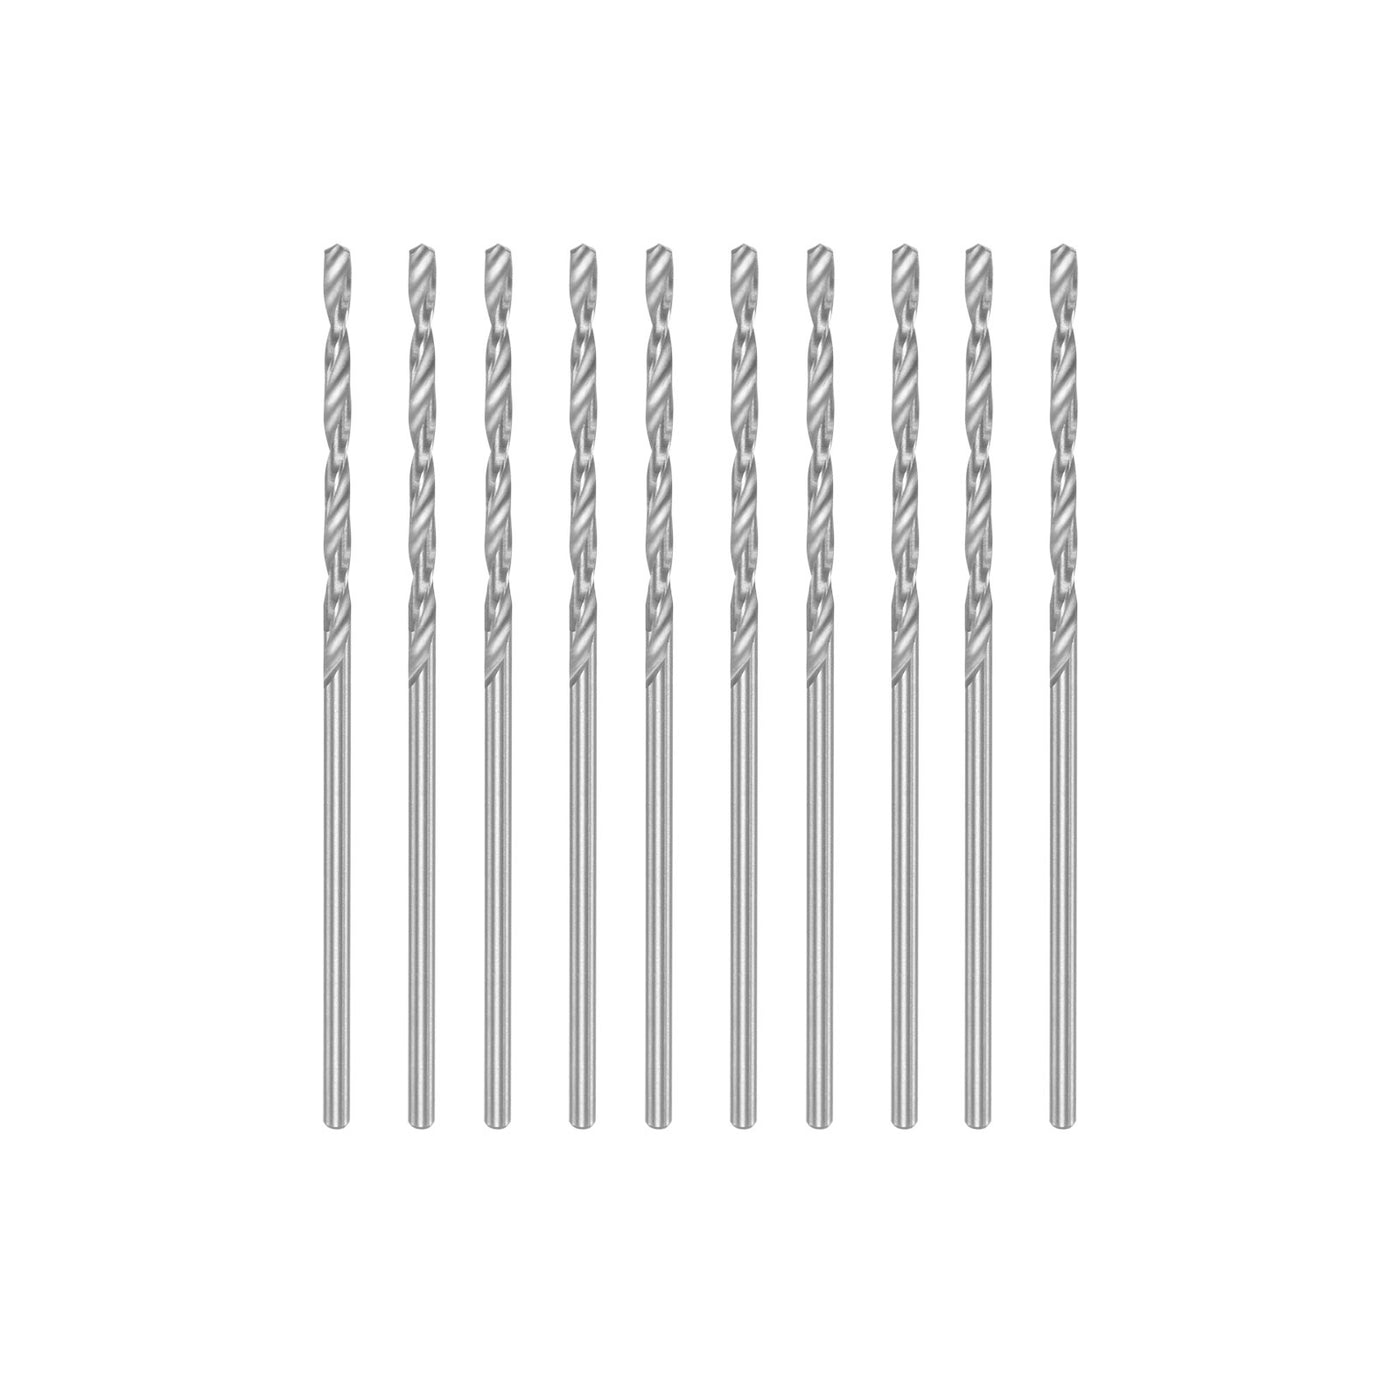 uxcell Uxcell 10 Pcs 1.55mm High Speed Steel Drill Bits, Fully Ground 50mm Length Drill Bit